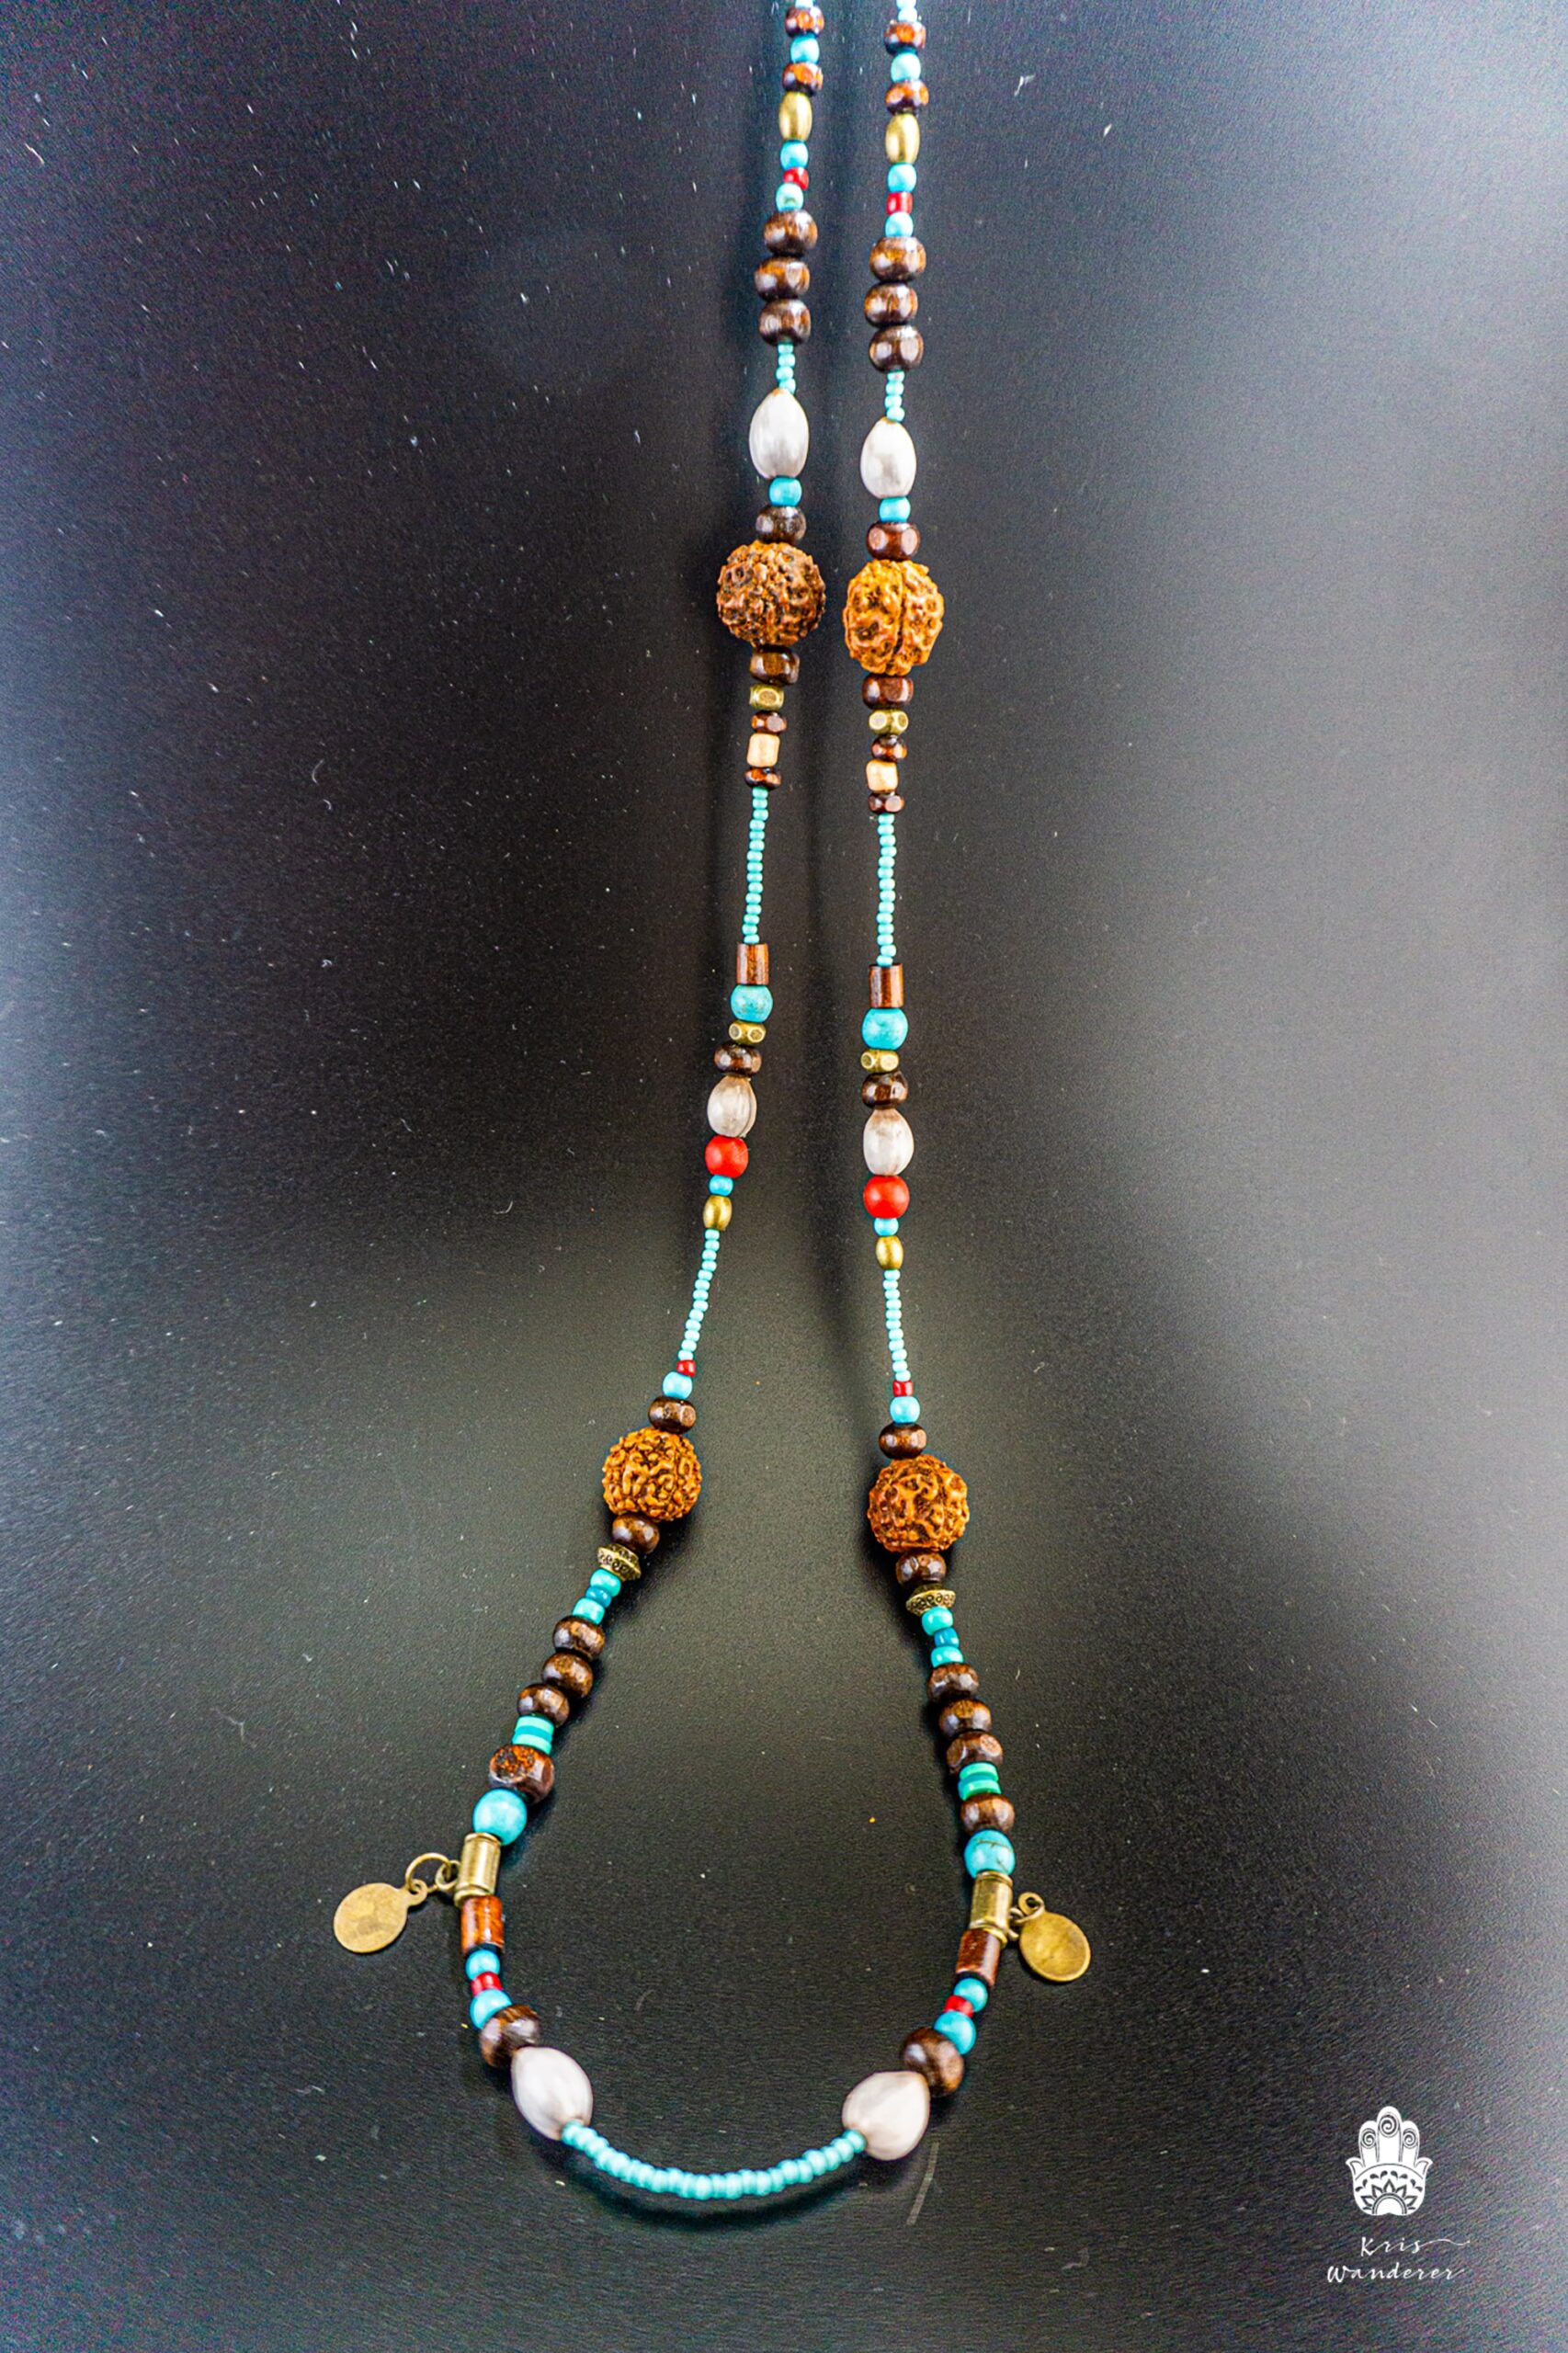 Necklaces - Buy Necklaces at Best Price in Nepal | www.daraz.com.np